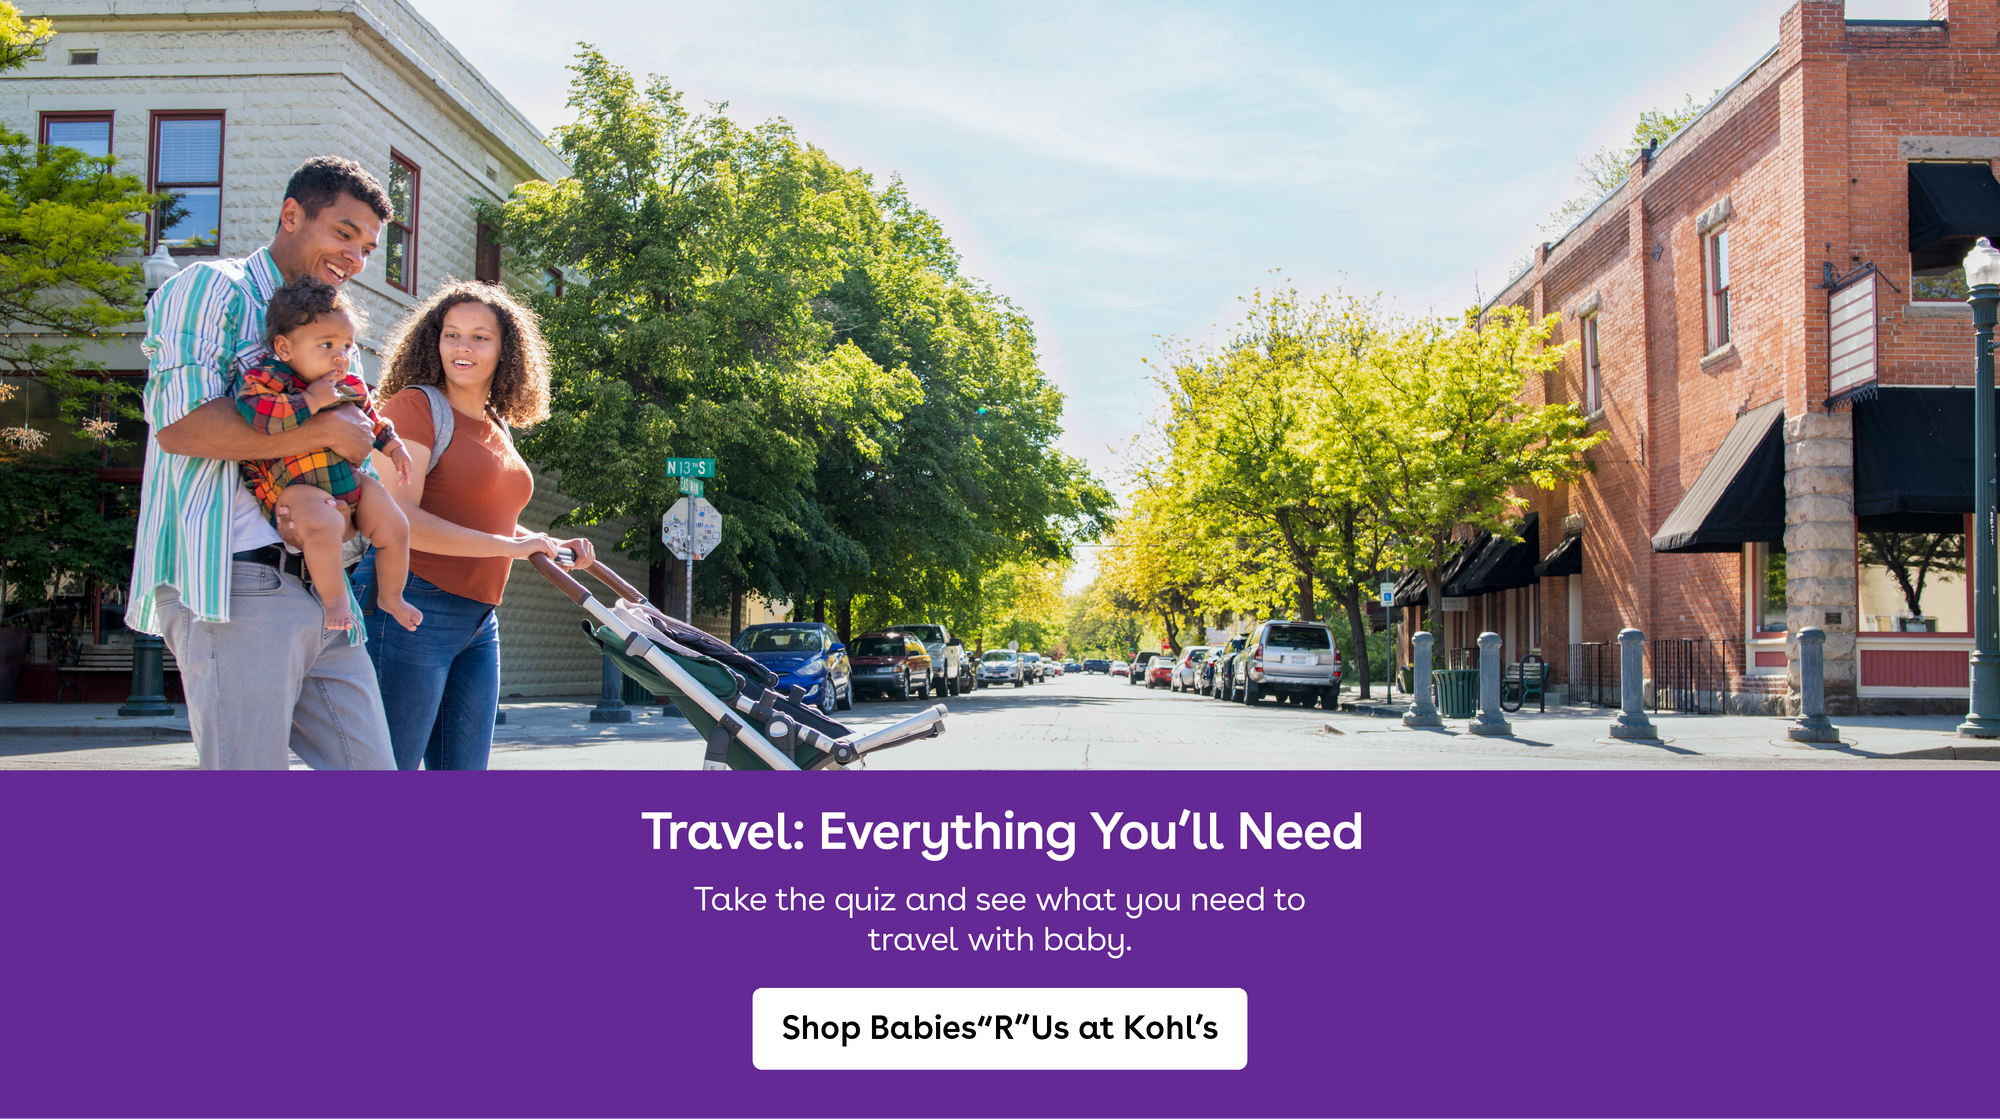 Travel. Everything you will need. take the quiz and see what you need to travel with baby. shop babies r us at kohls